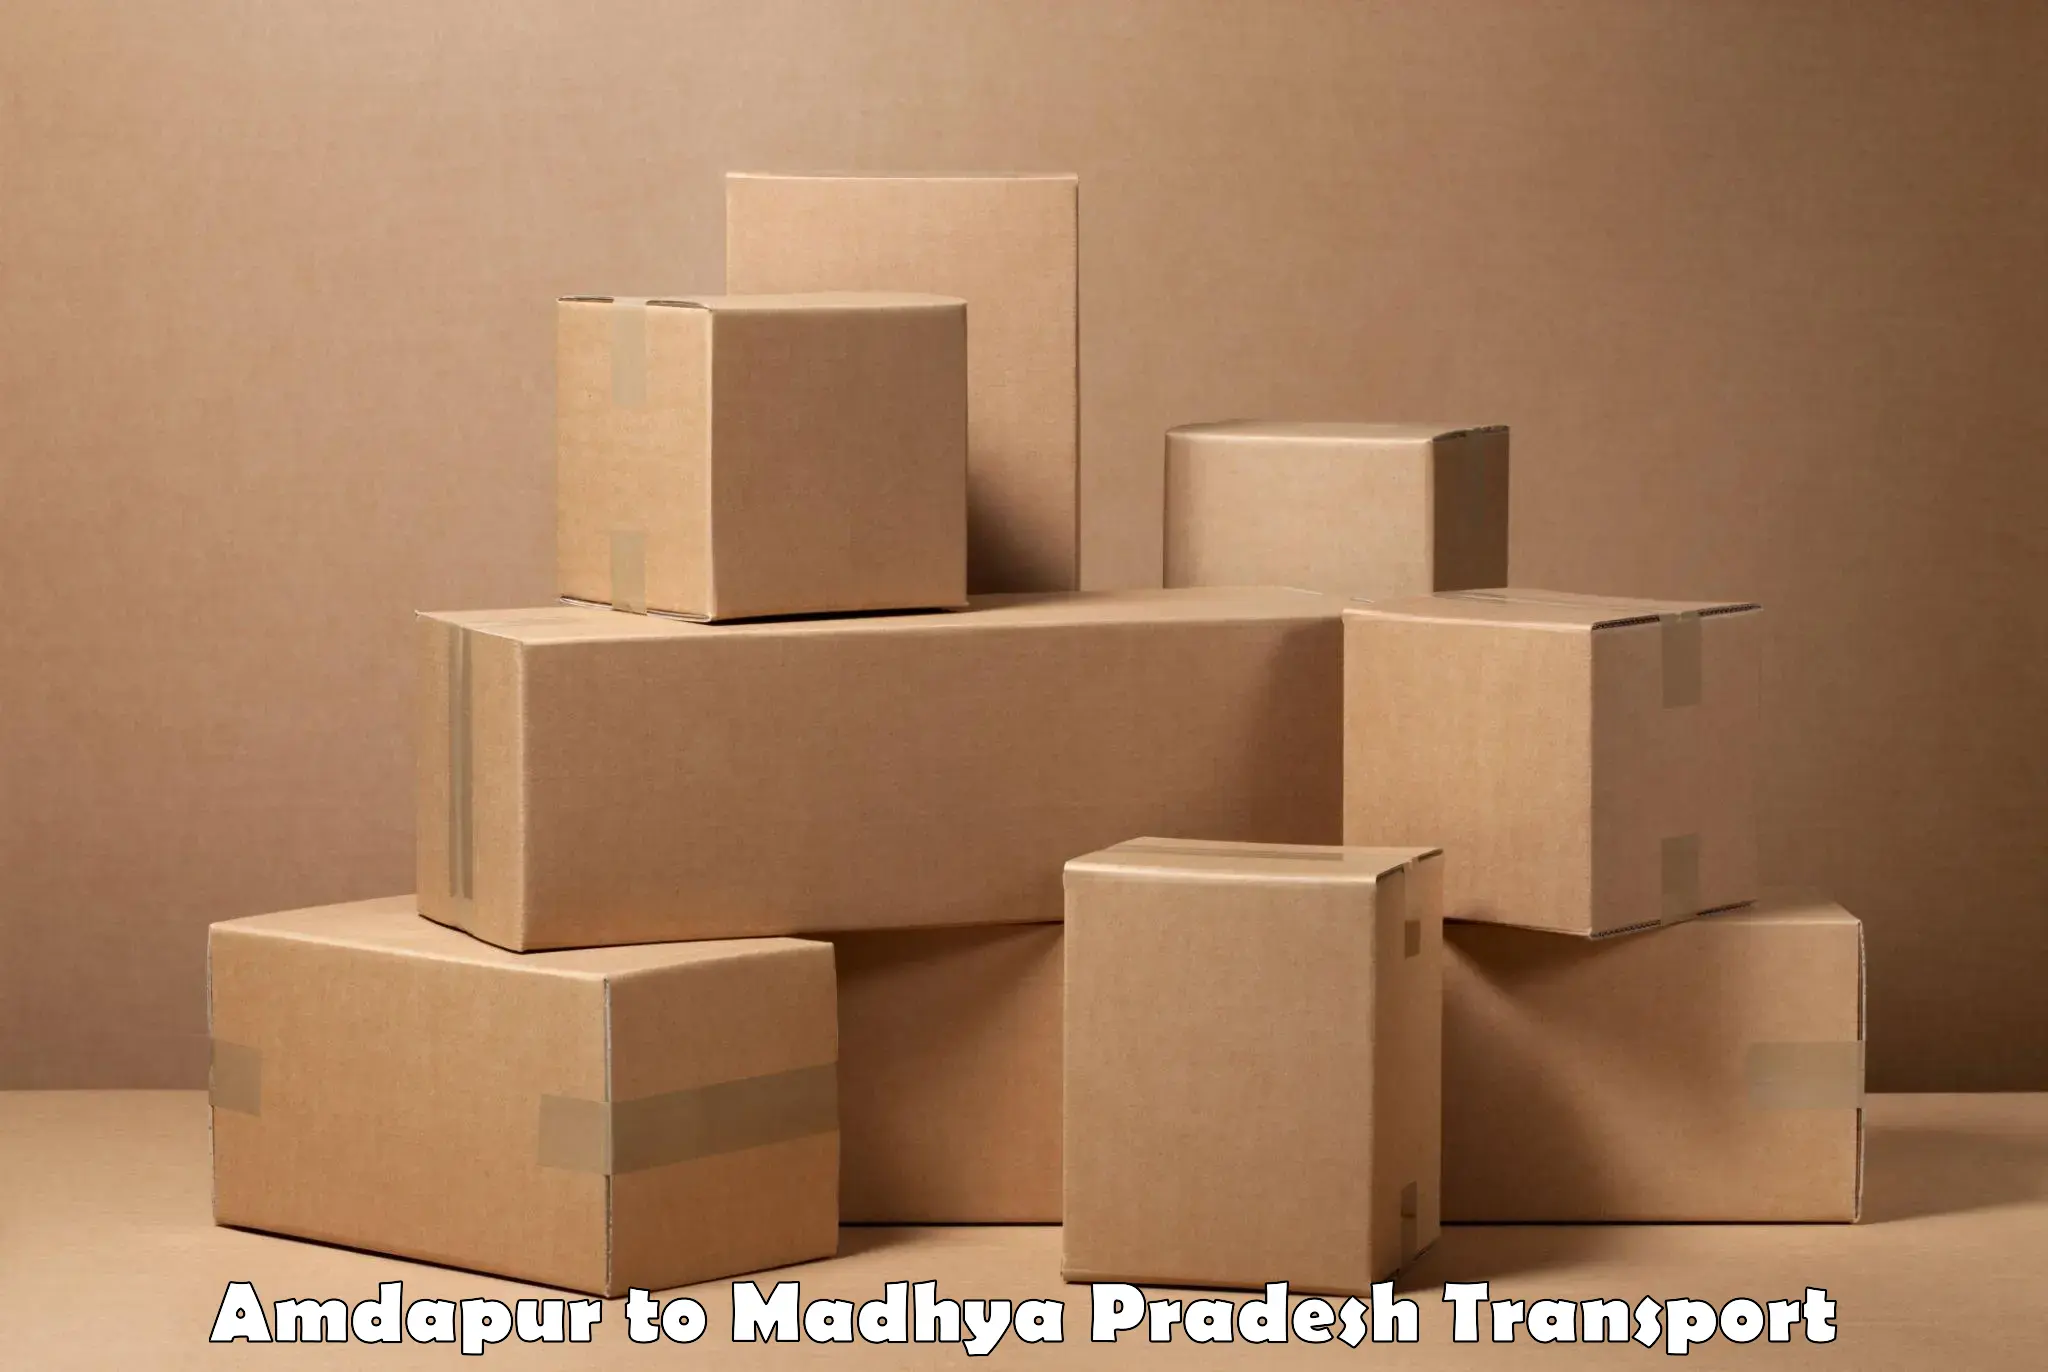 Parcel transport services Amdapur to Jawad Neemuch